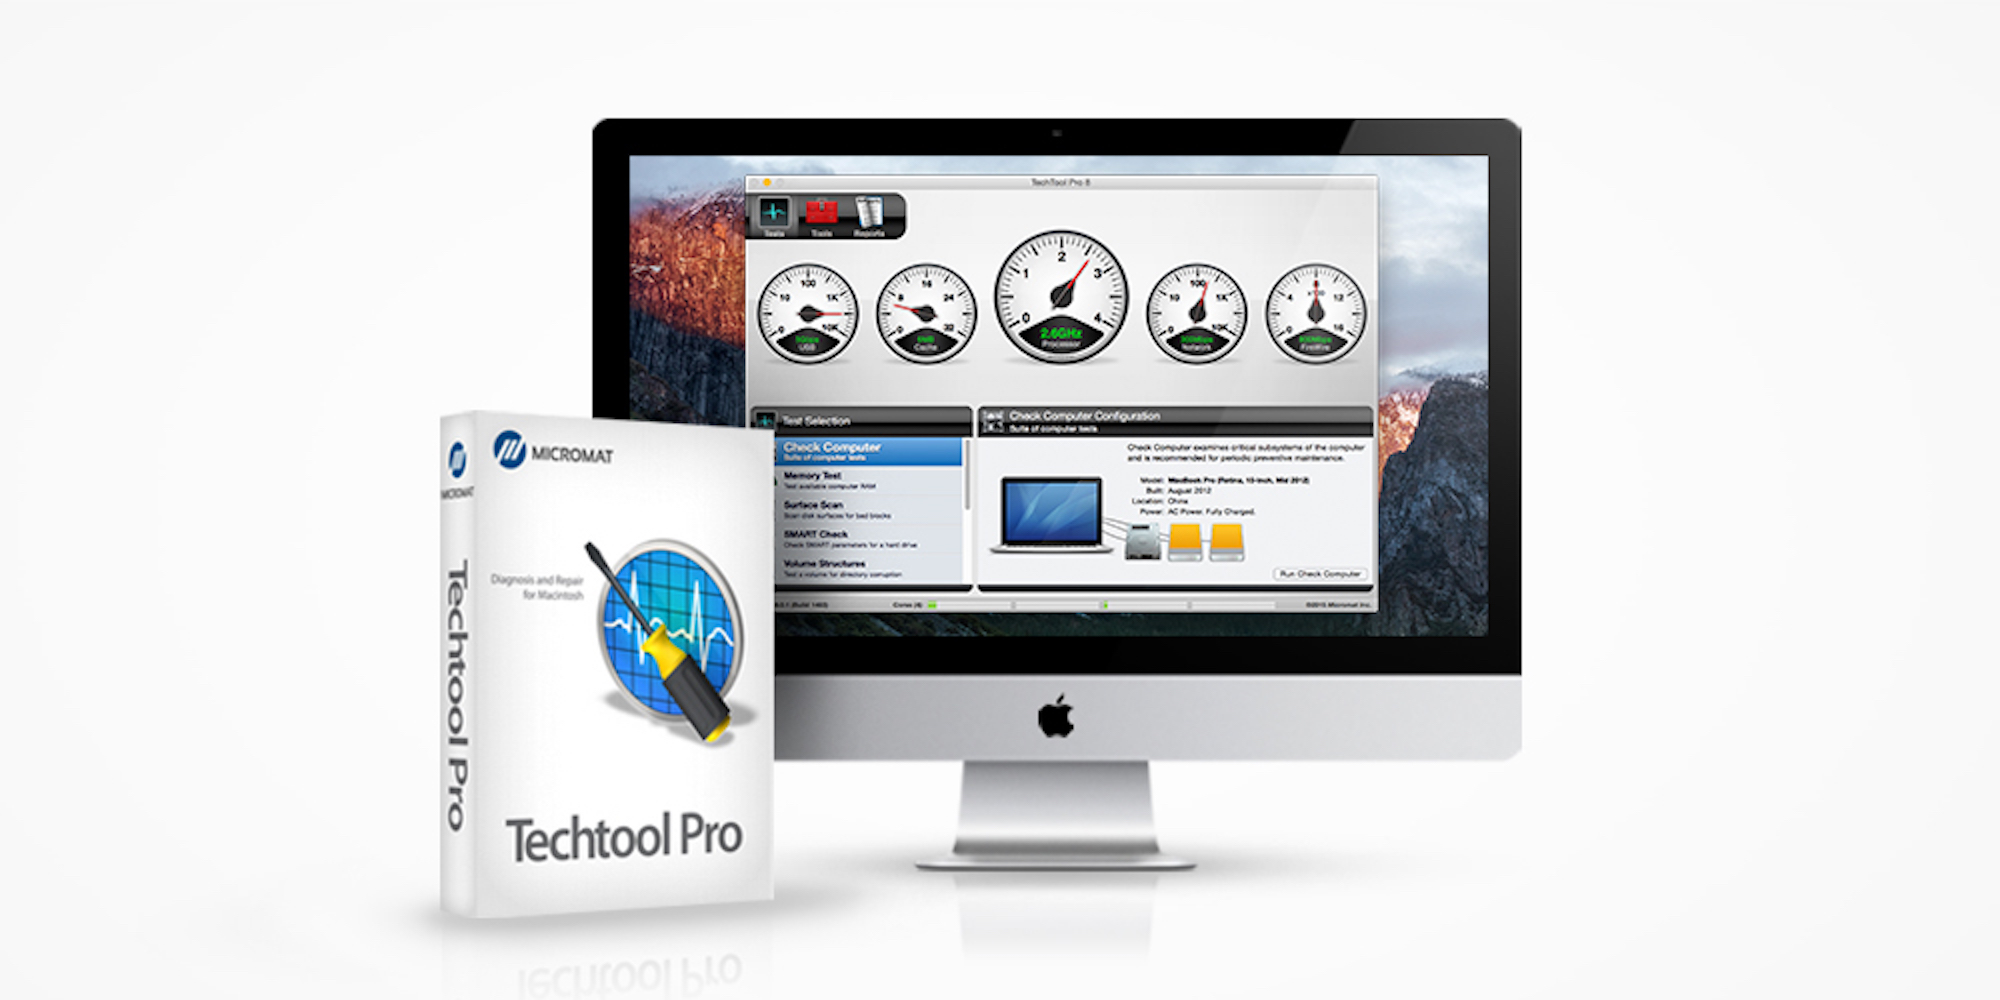 download the last version for apple TurboFTP Corporate / Lite 6.99.1340